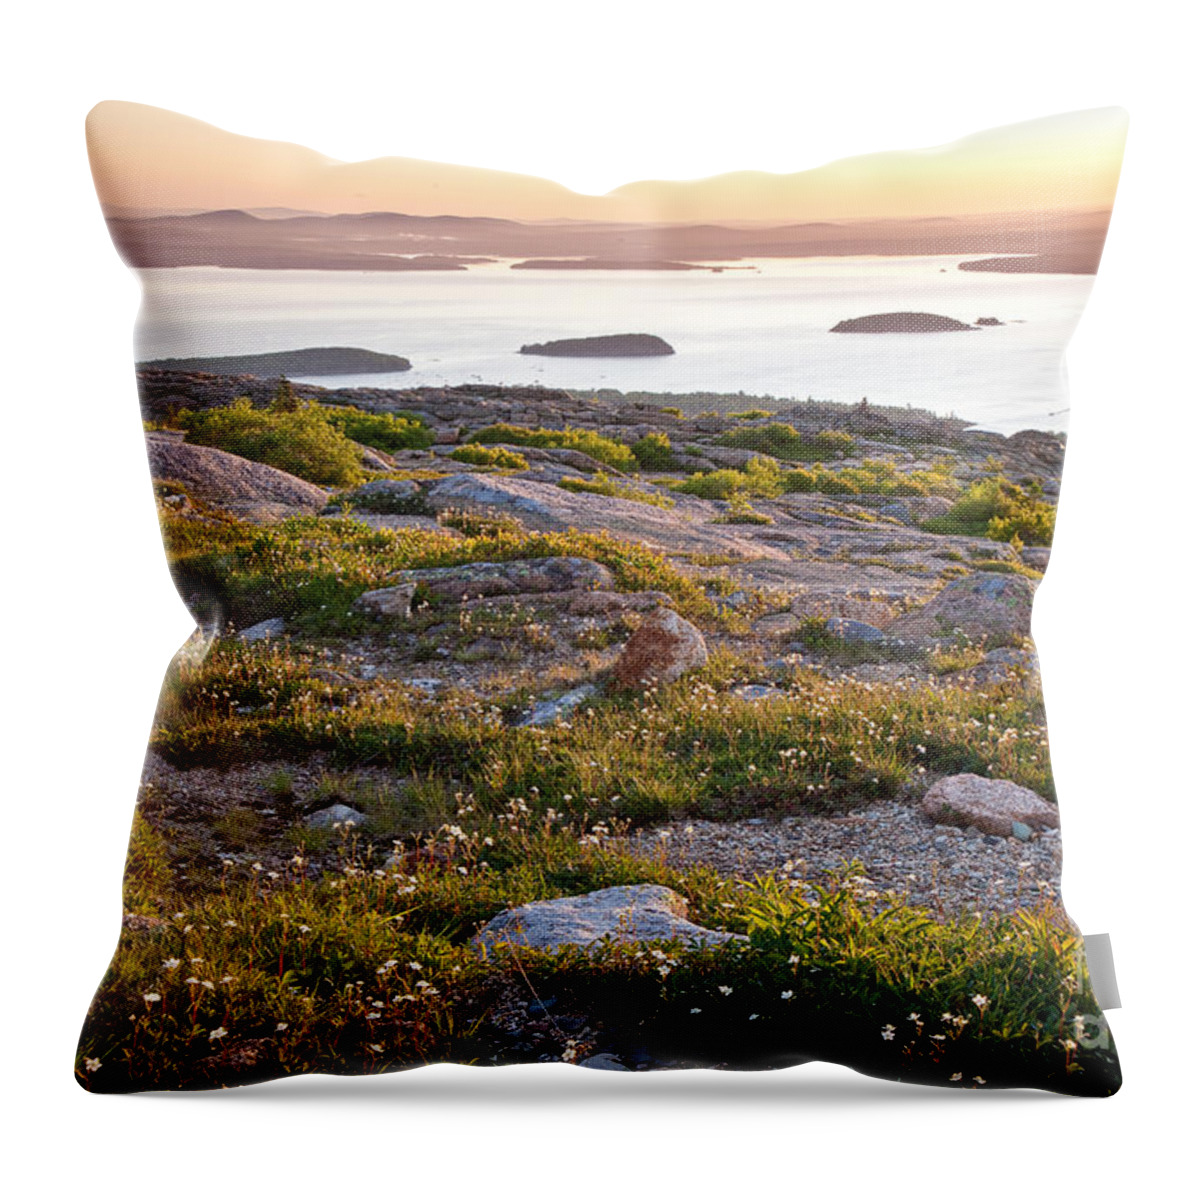 Acadia National Park Throw Pillow featuring the photograph Cadillac Mountain View by Susan Cole Kelly